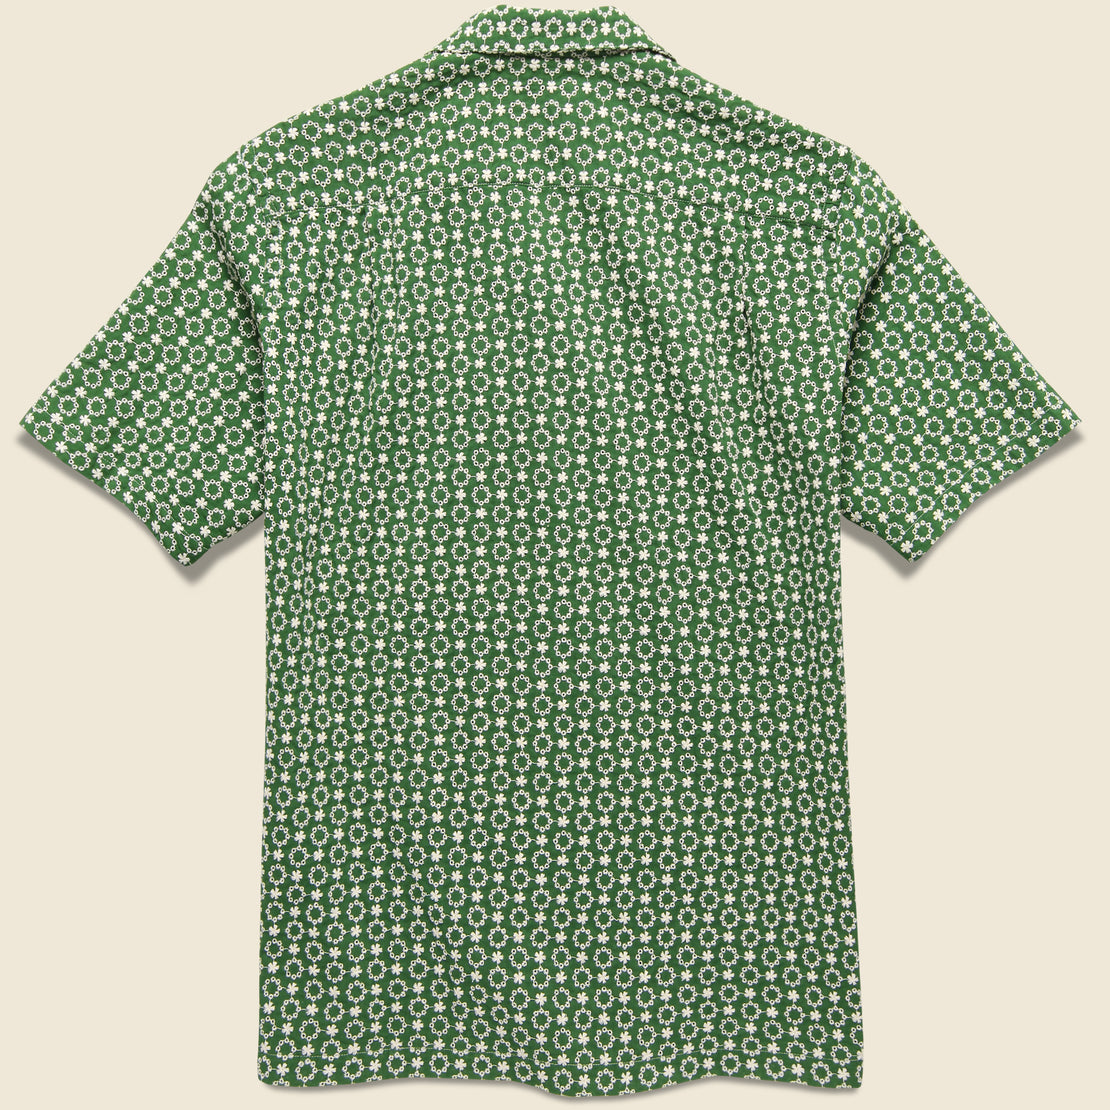 Folklore 3 Embroidered Camp Shirt - Green